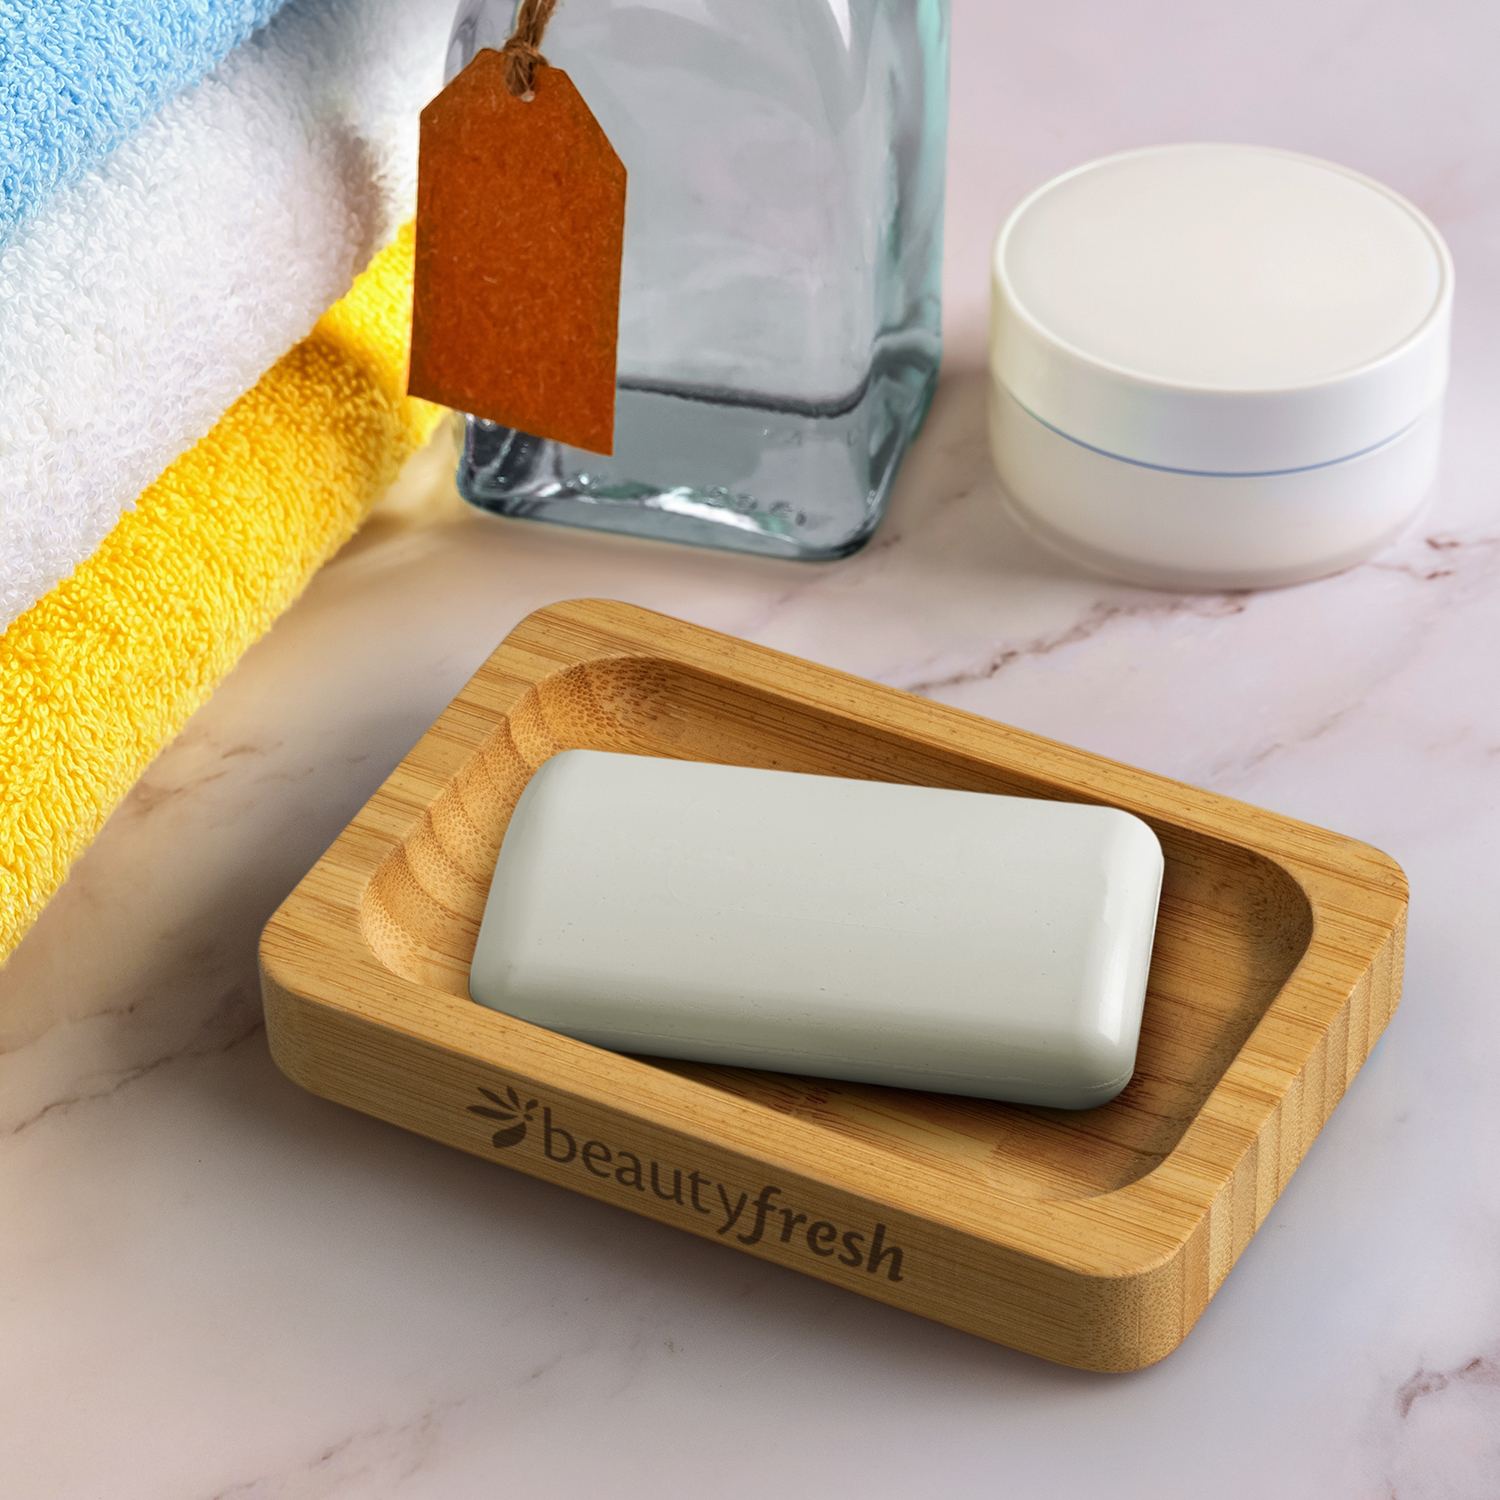 Bamboo Soap Holder Features